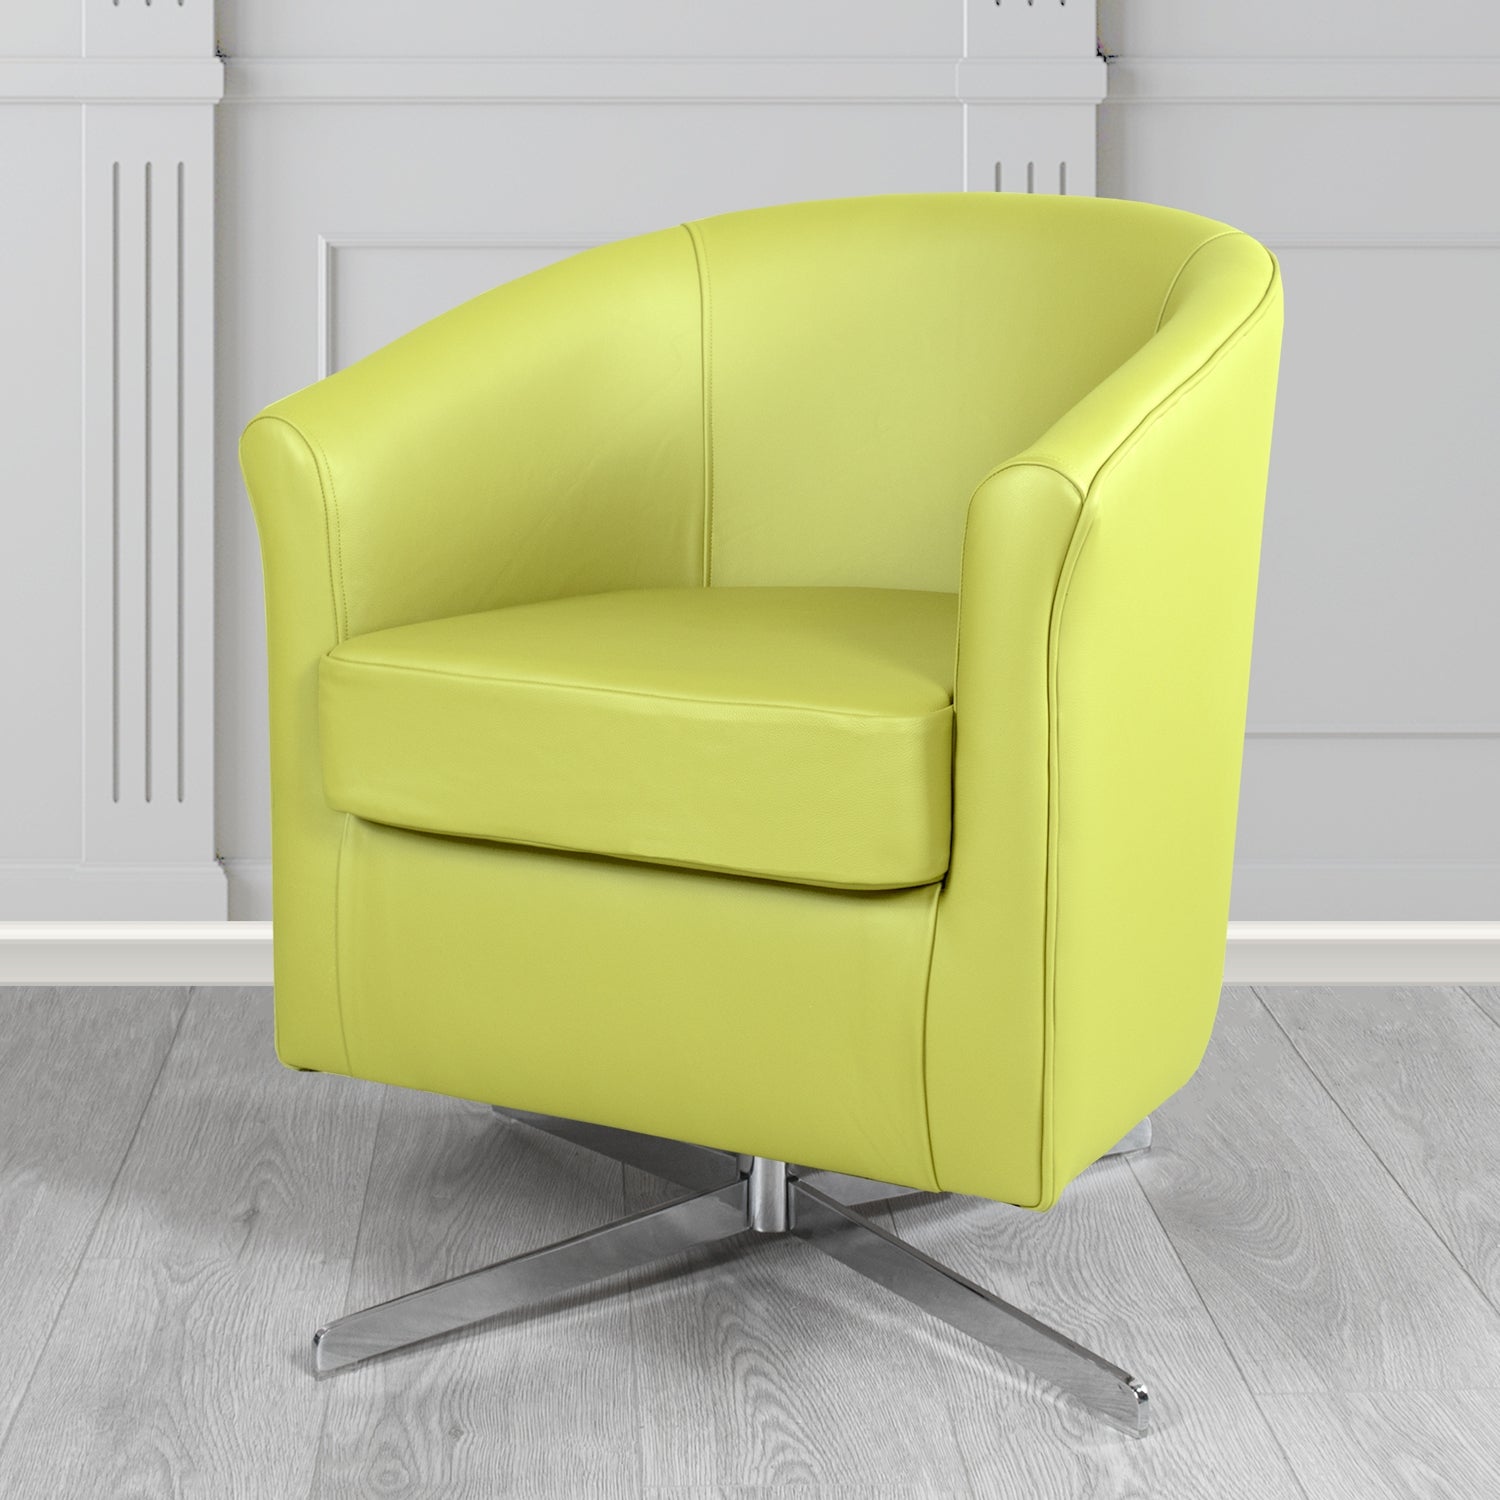 Cannes Swivel Tub Chair in Shelly Chartreause Crib 5 Genuine Leather - The Tub Chair Shop